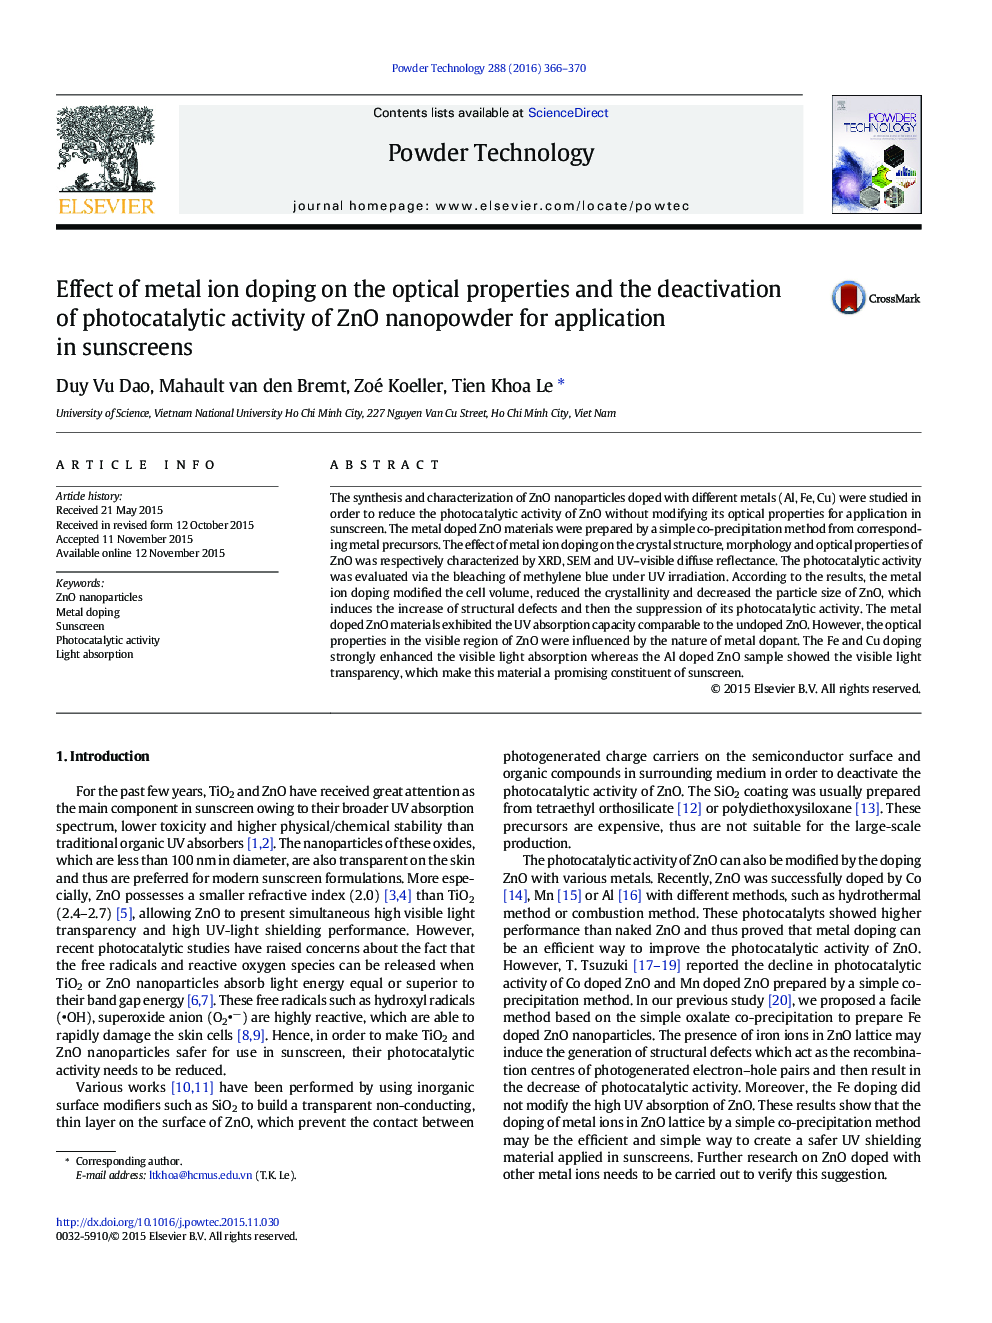 Effect of metal ion doping on the optical properties and the deactivation of photocatalytic activity of ZnO nanopowder for application in sunscreens